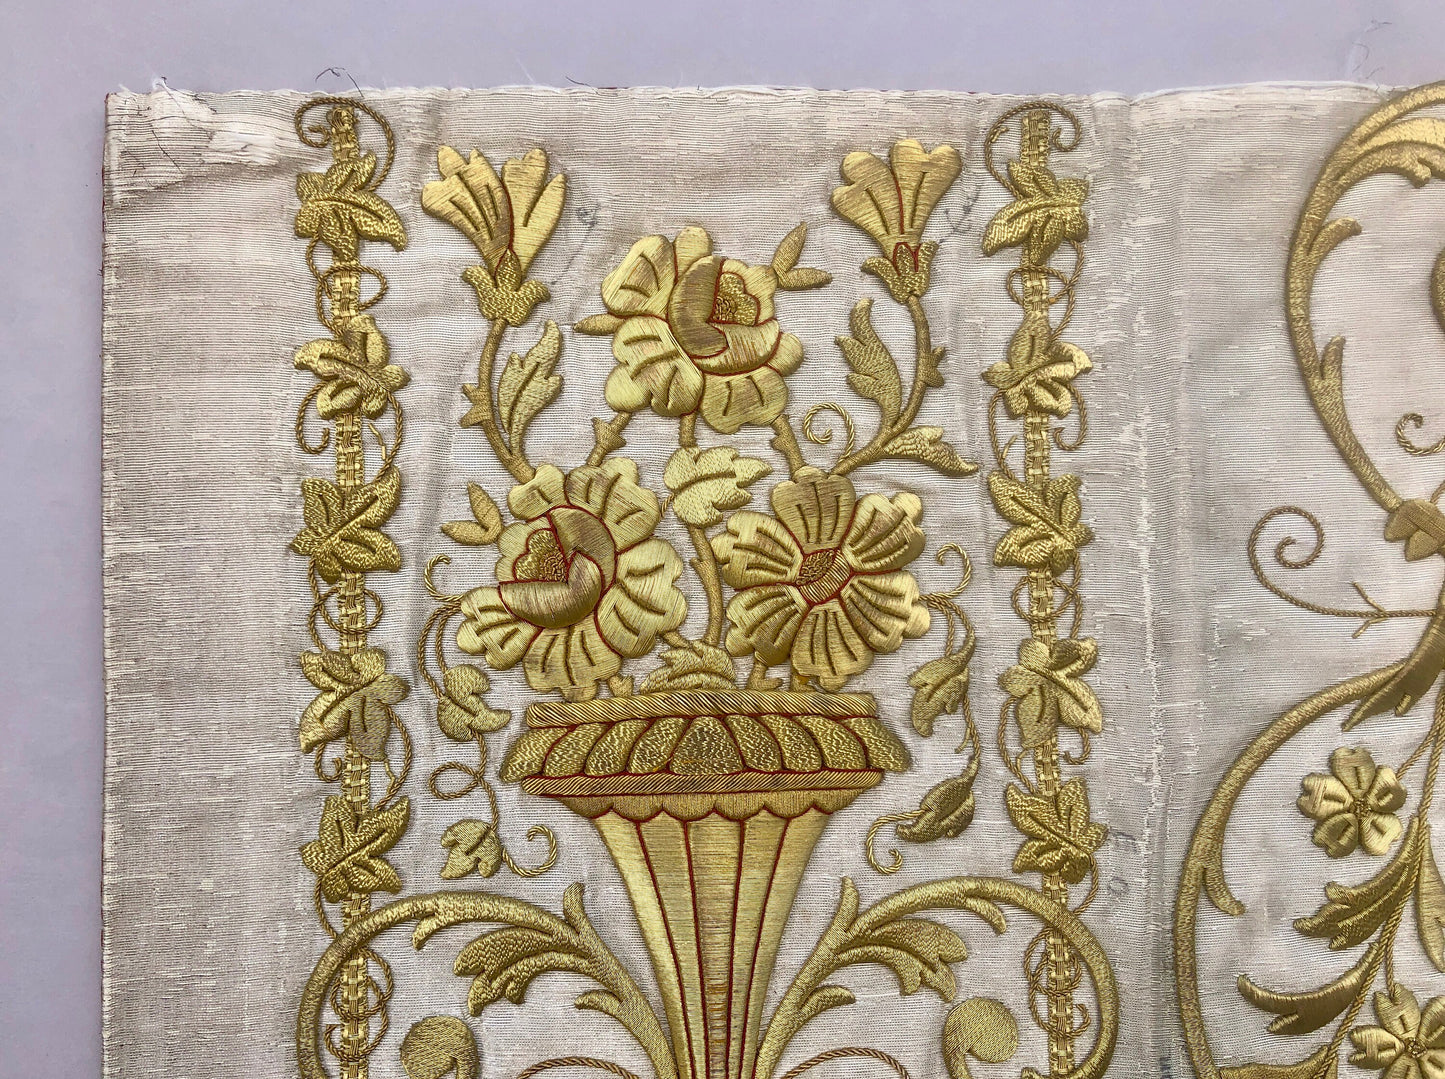 A Textile Sample From Lyon, France. Design For a Chasuble. Heavily Embroidered With Gold Thread. Late 19th Century. 58x 47.5 cms.